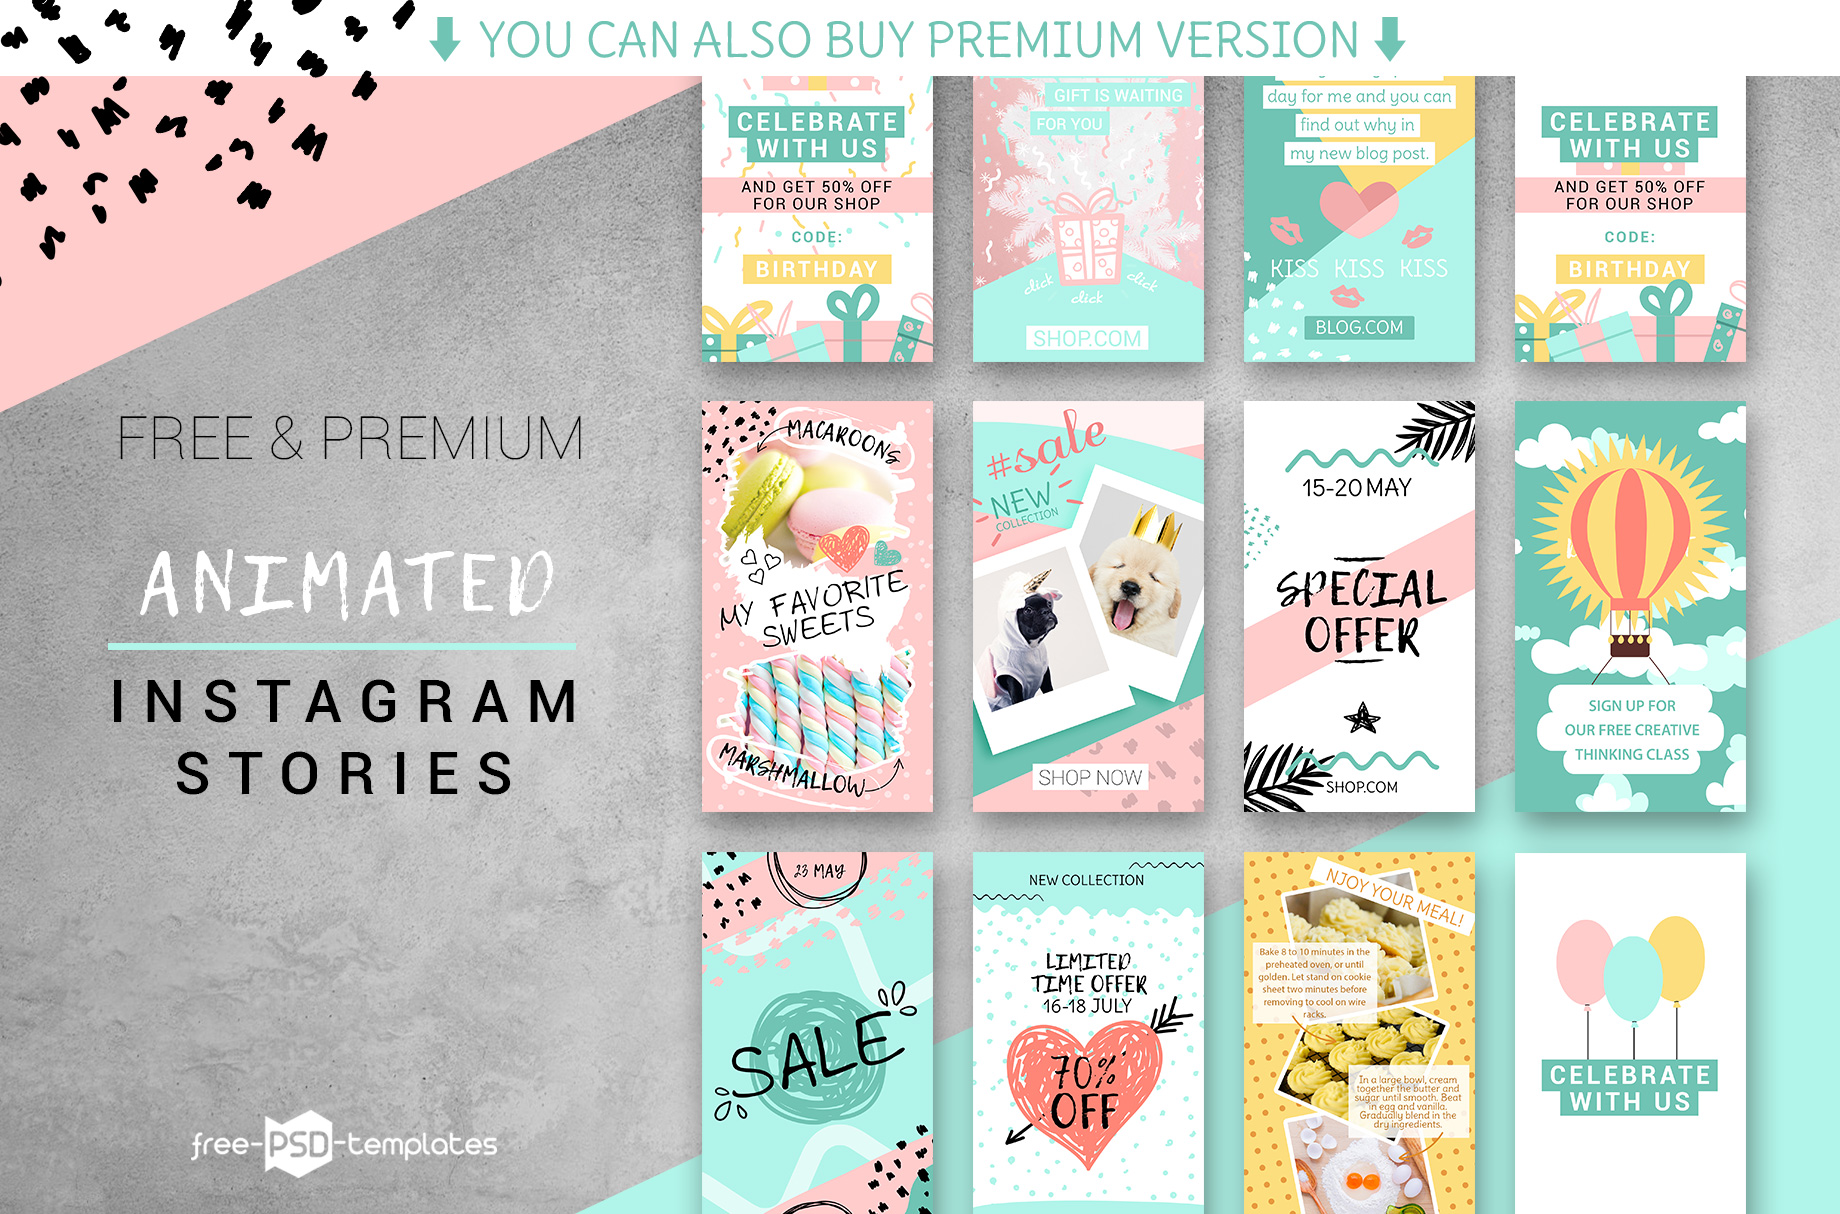 50+ Free & Premium PSD Themed Party Flyer Templates – Free PSD Templates